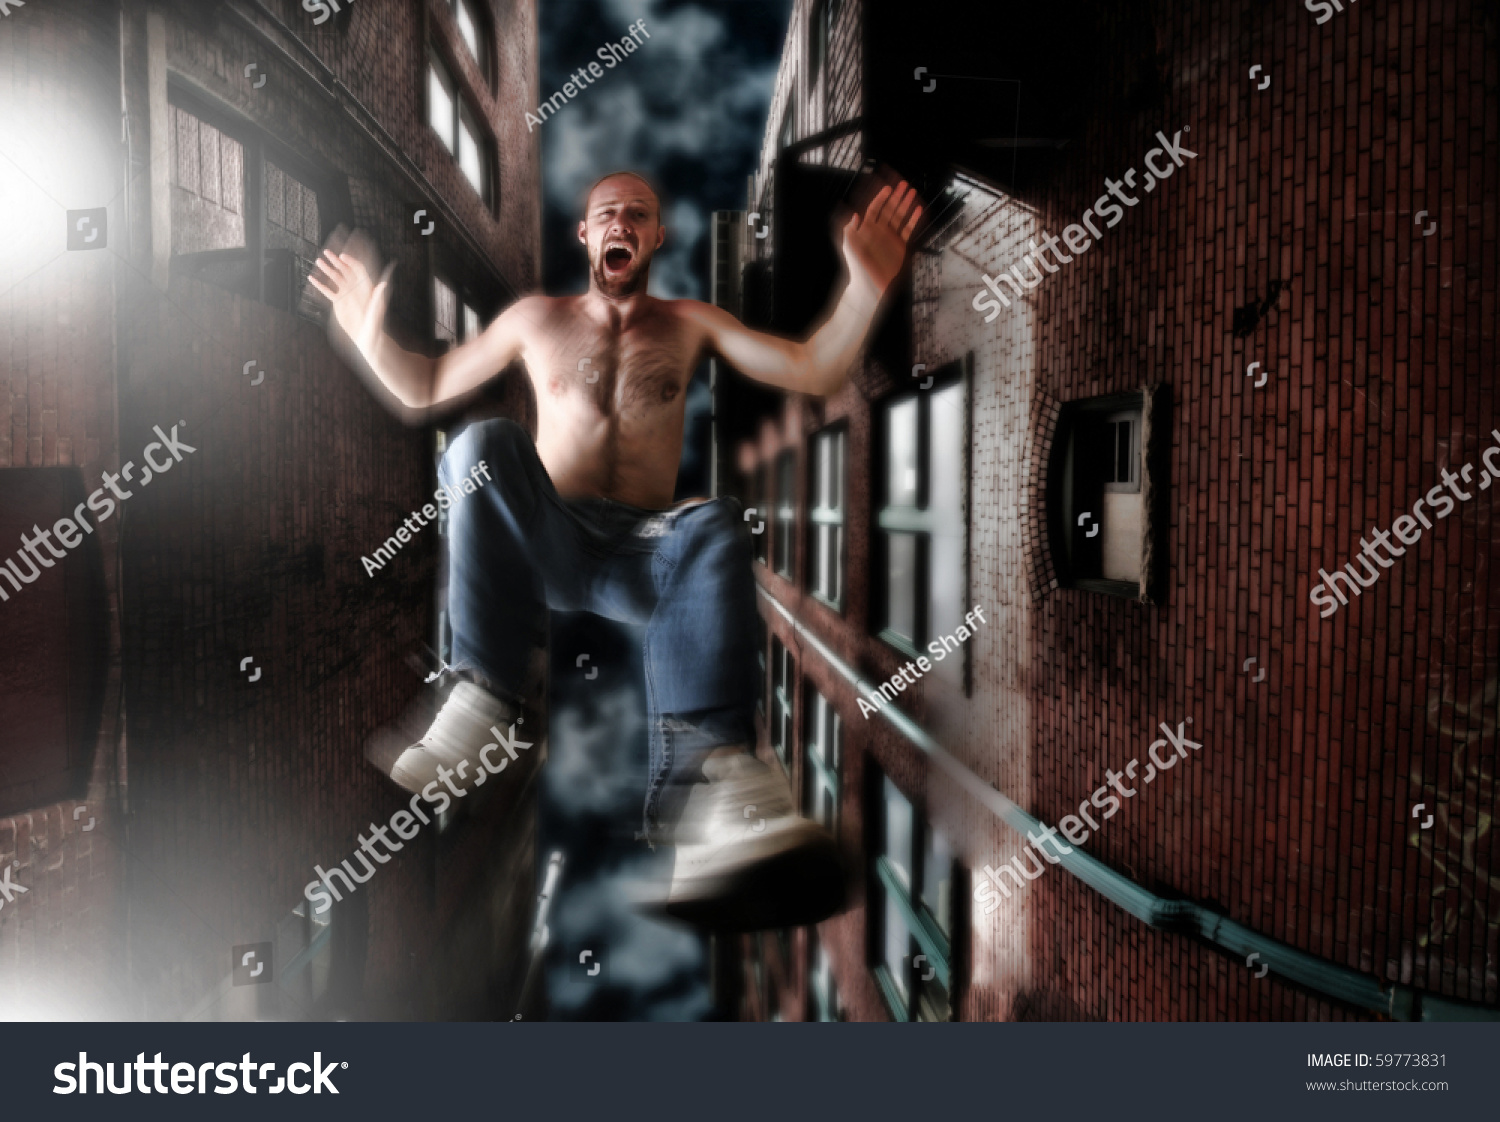 A Man Falling Off The Roof Of A Building Stock Photo 59773831 Shutterstock